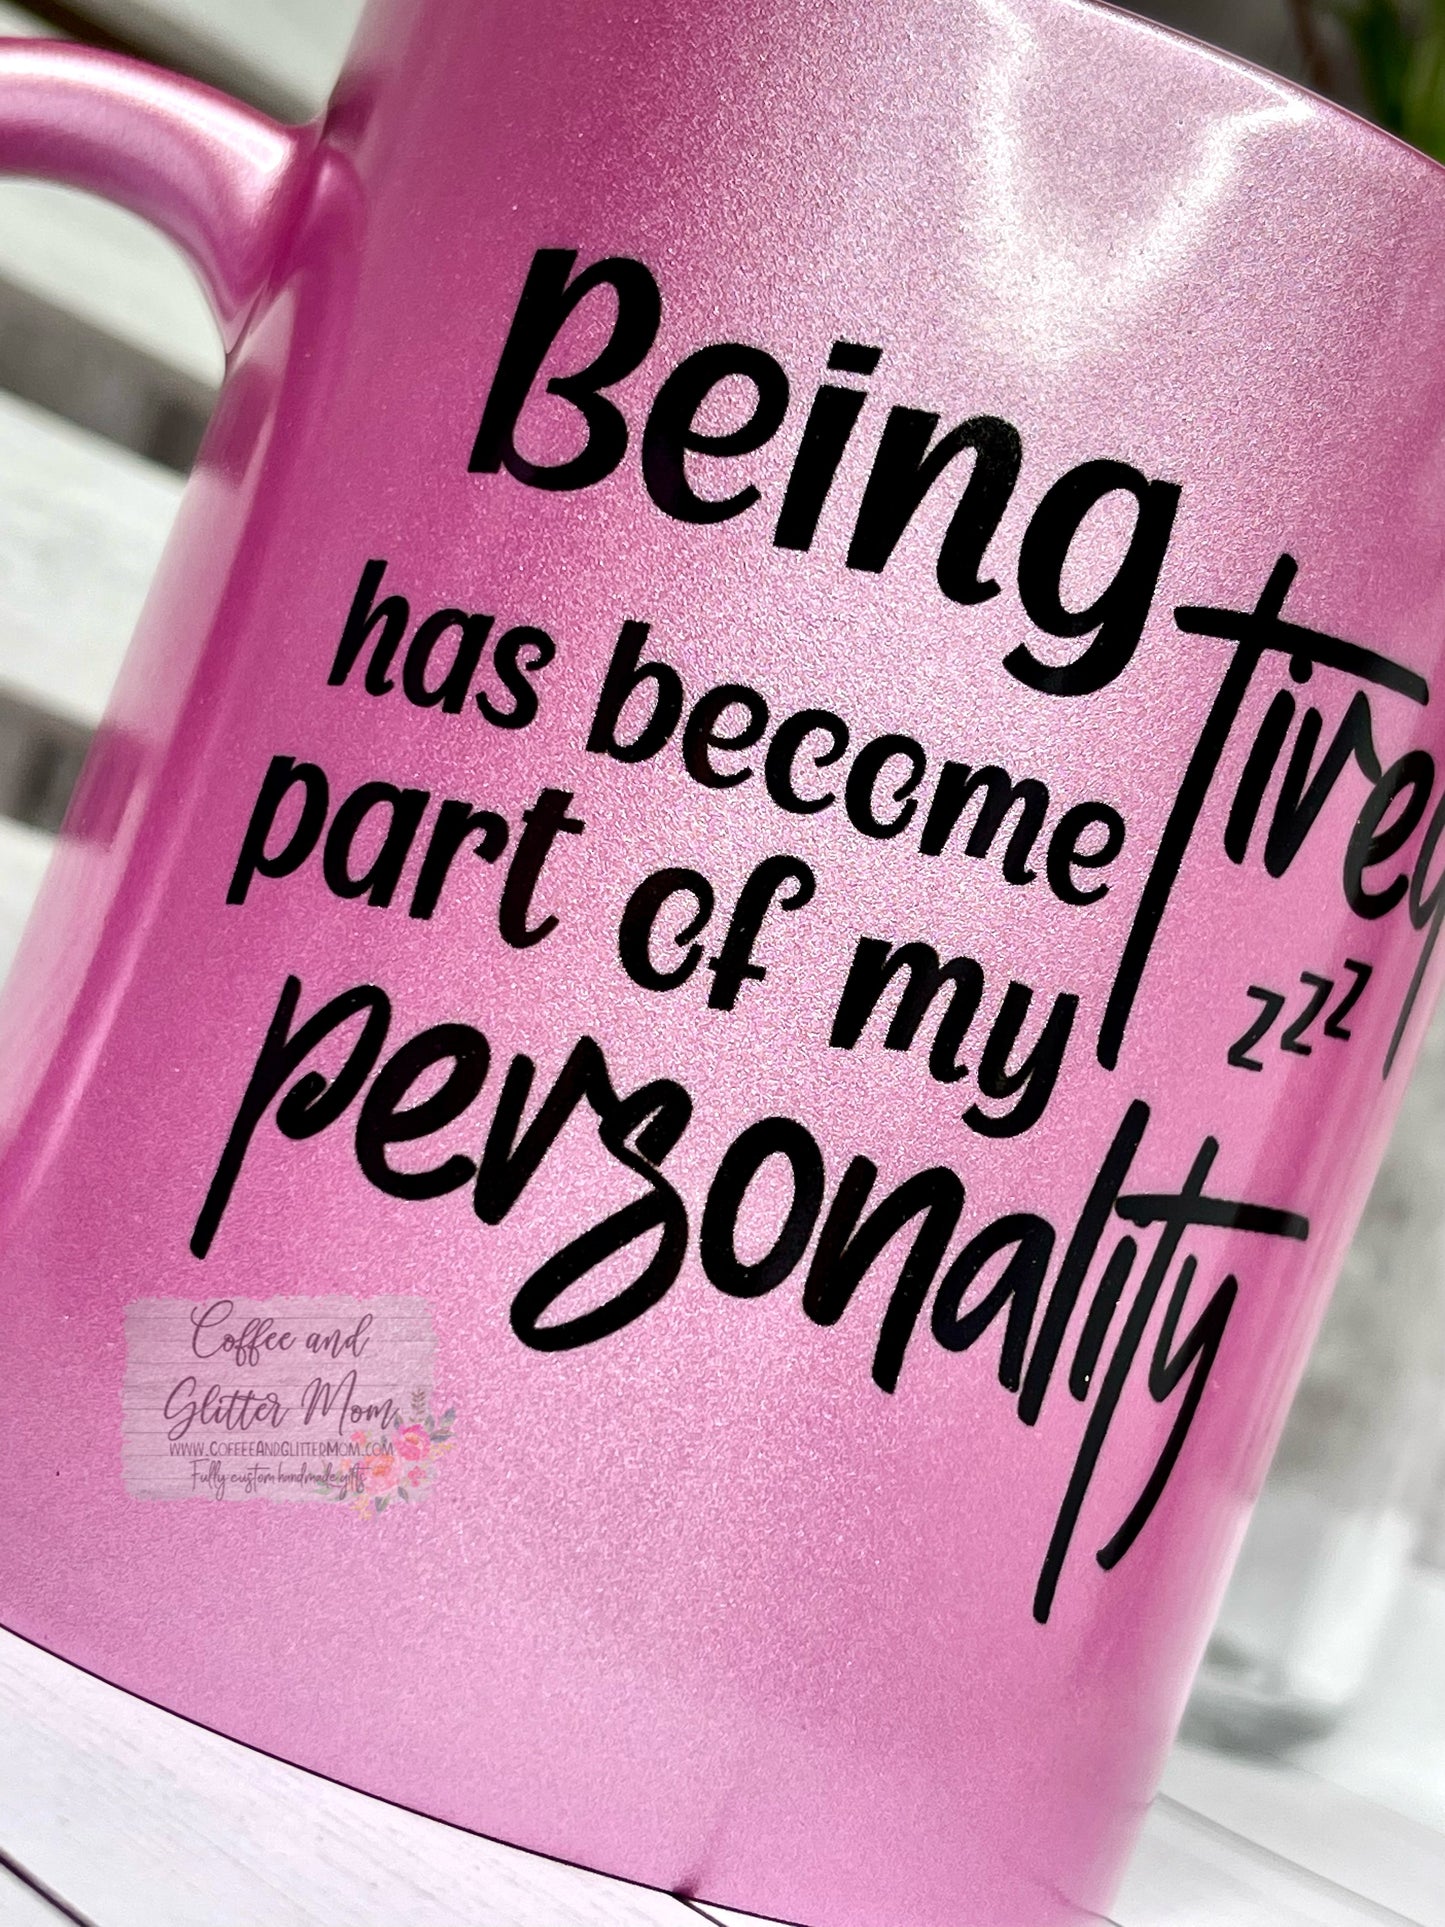 Being Tired is my Personality 11oz Pink Pearl Ceramic Mug